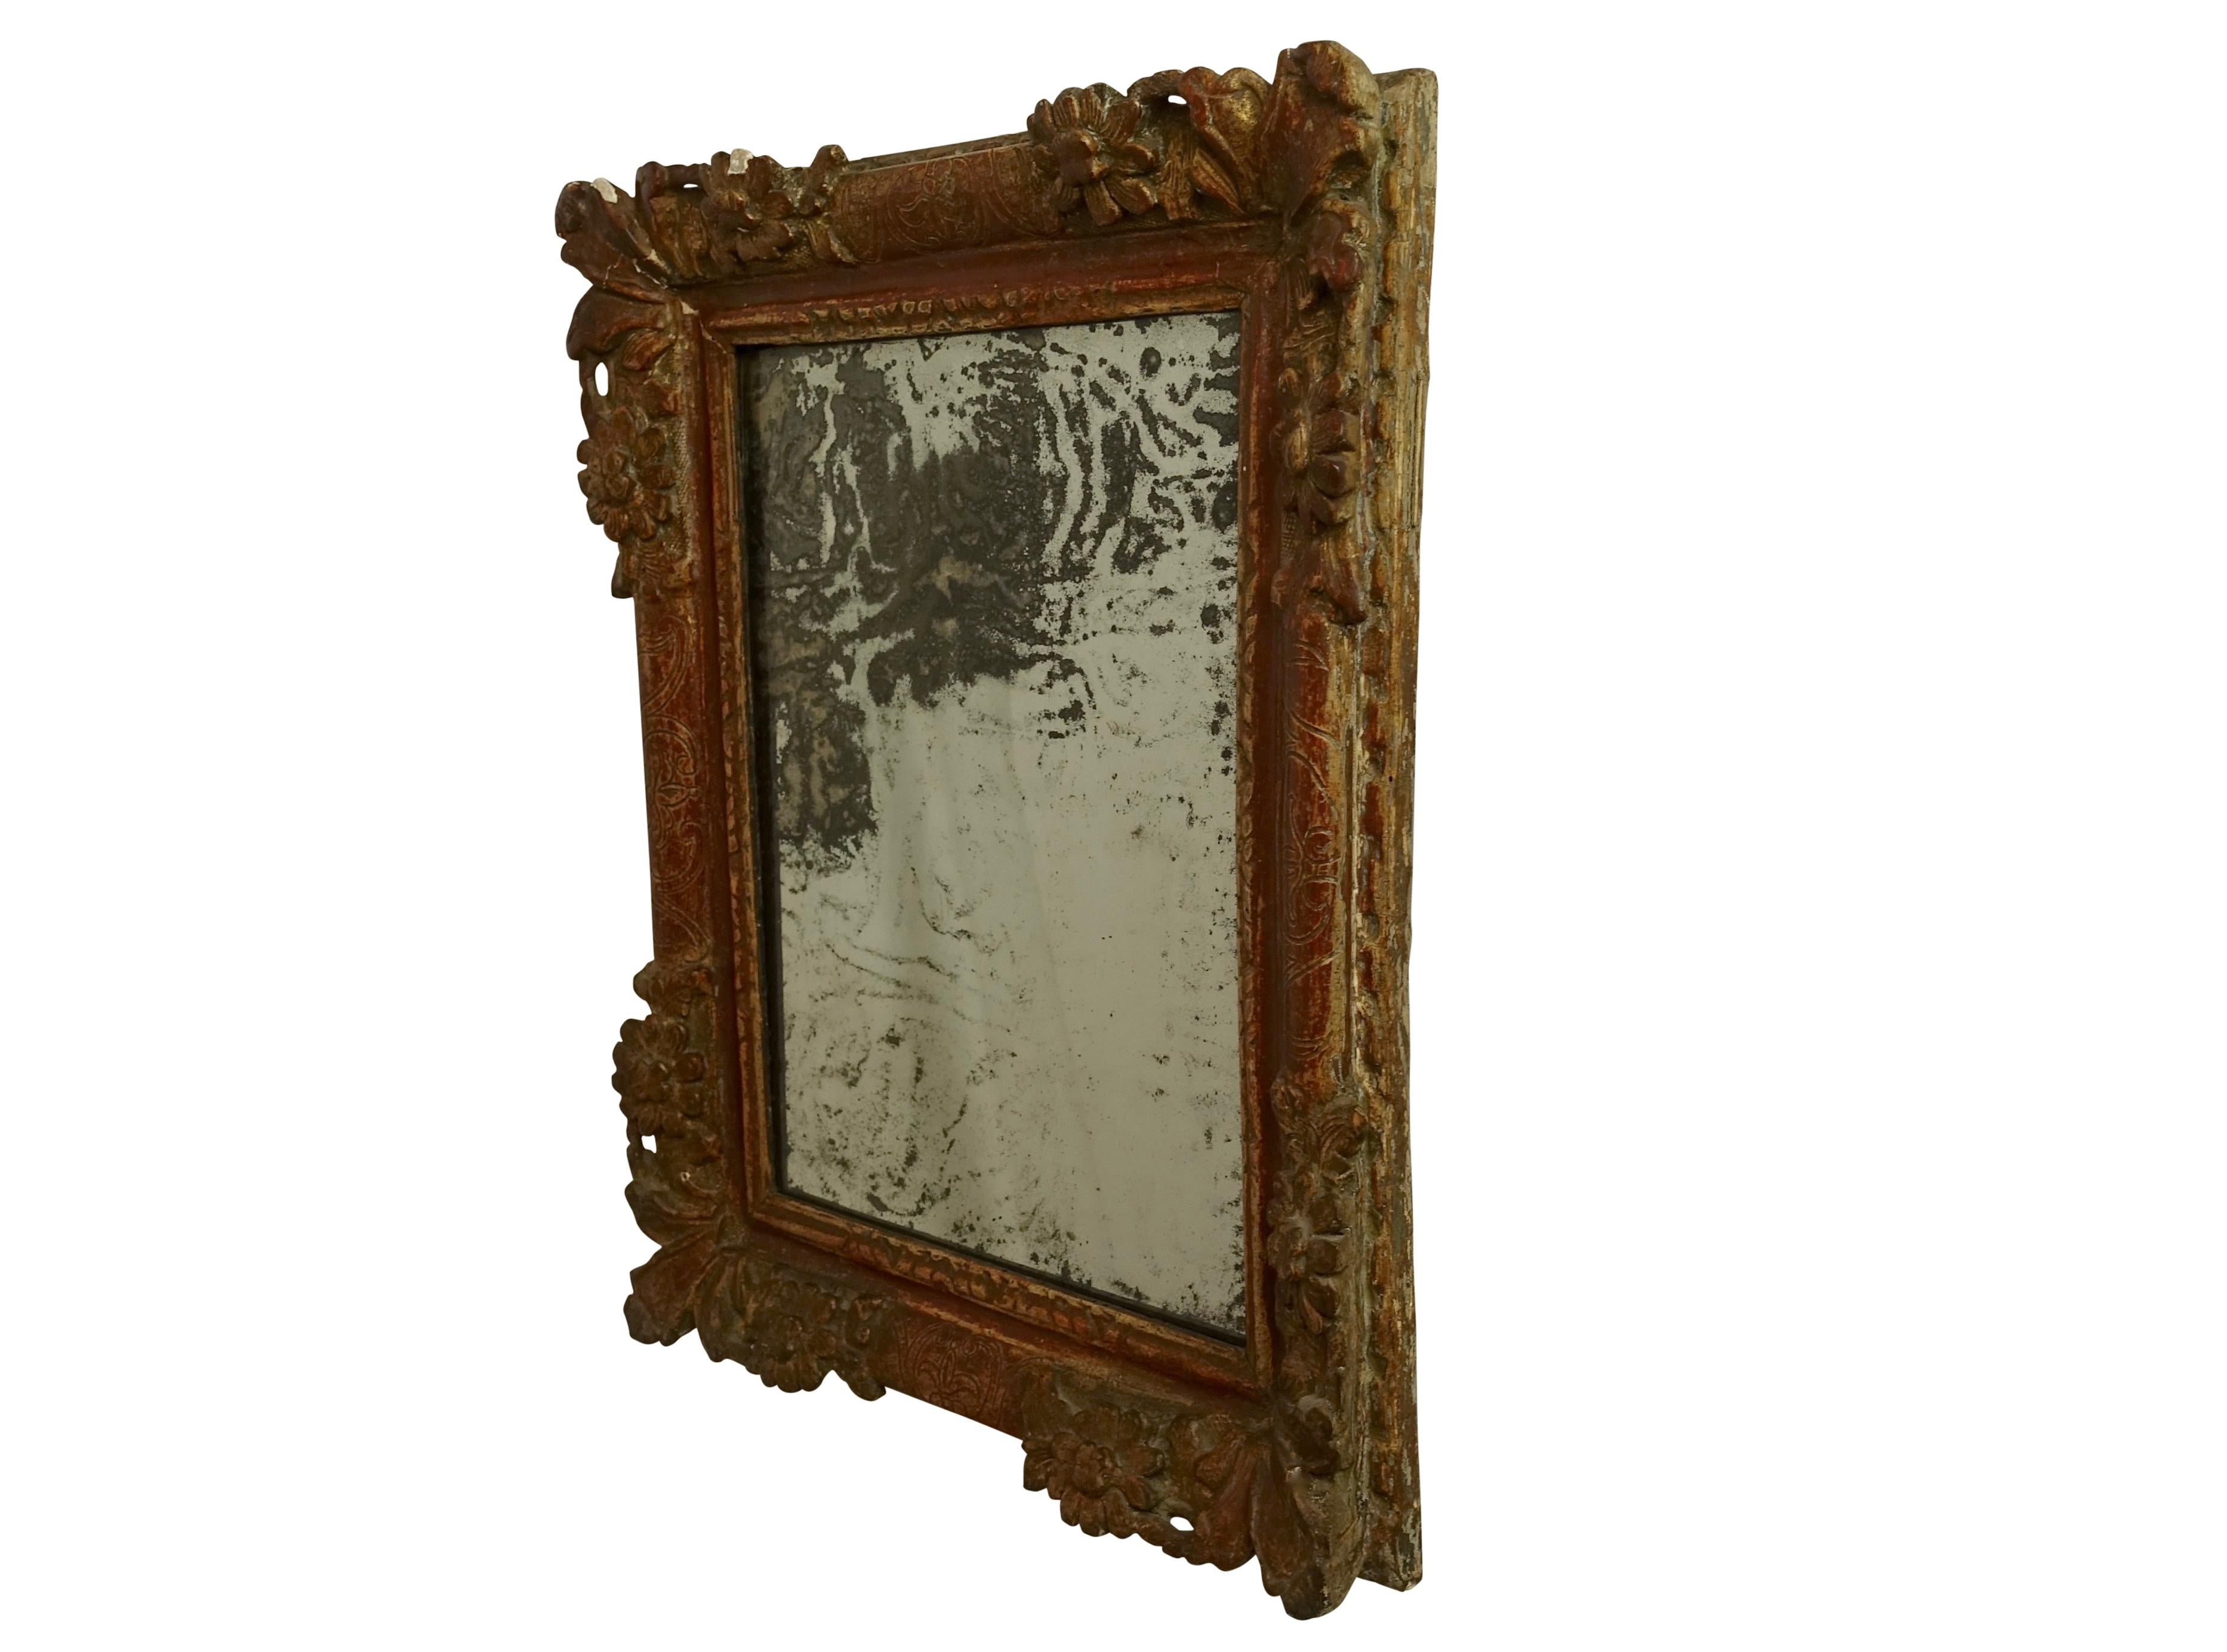 18th century Italian painting frame with old glass mirror. Frame has remnants of old paint and gilt, with beautifully aged and distressed mirror. 